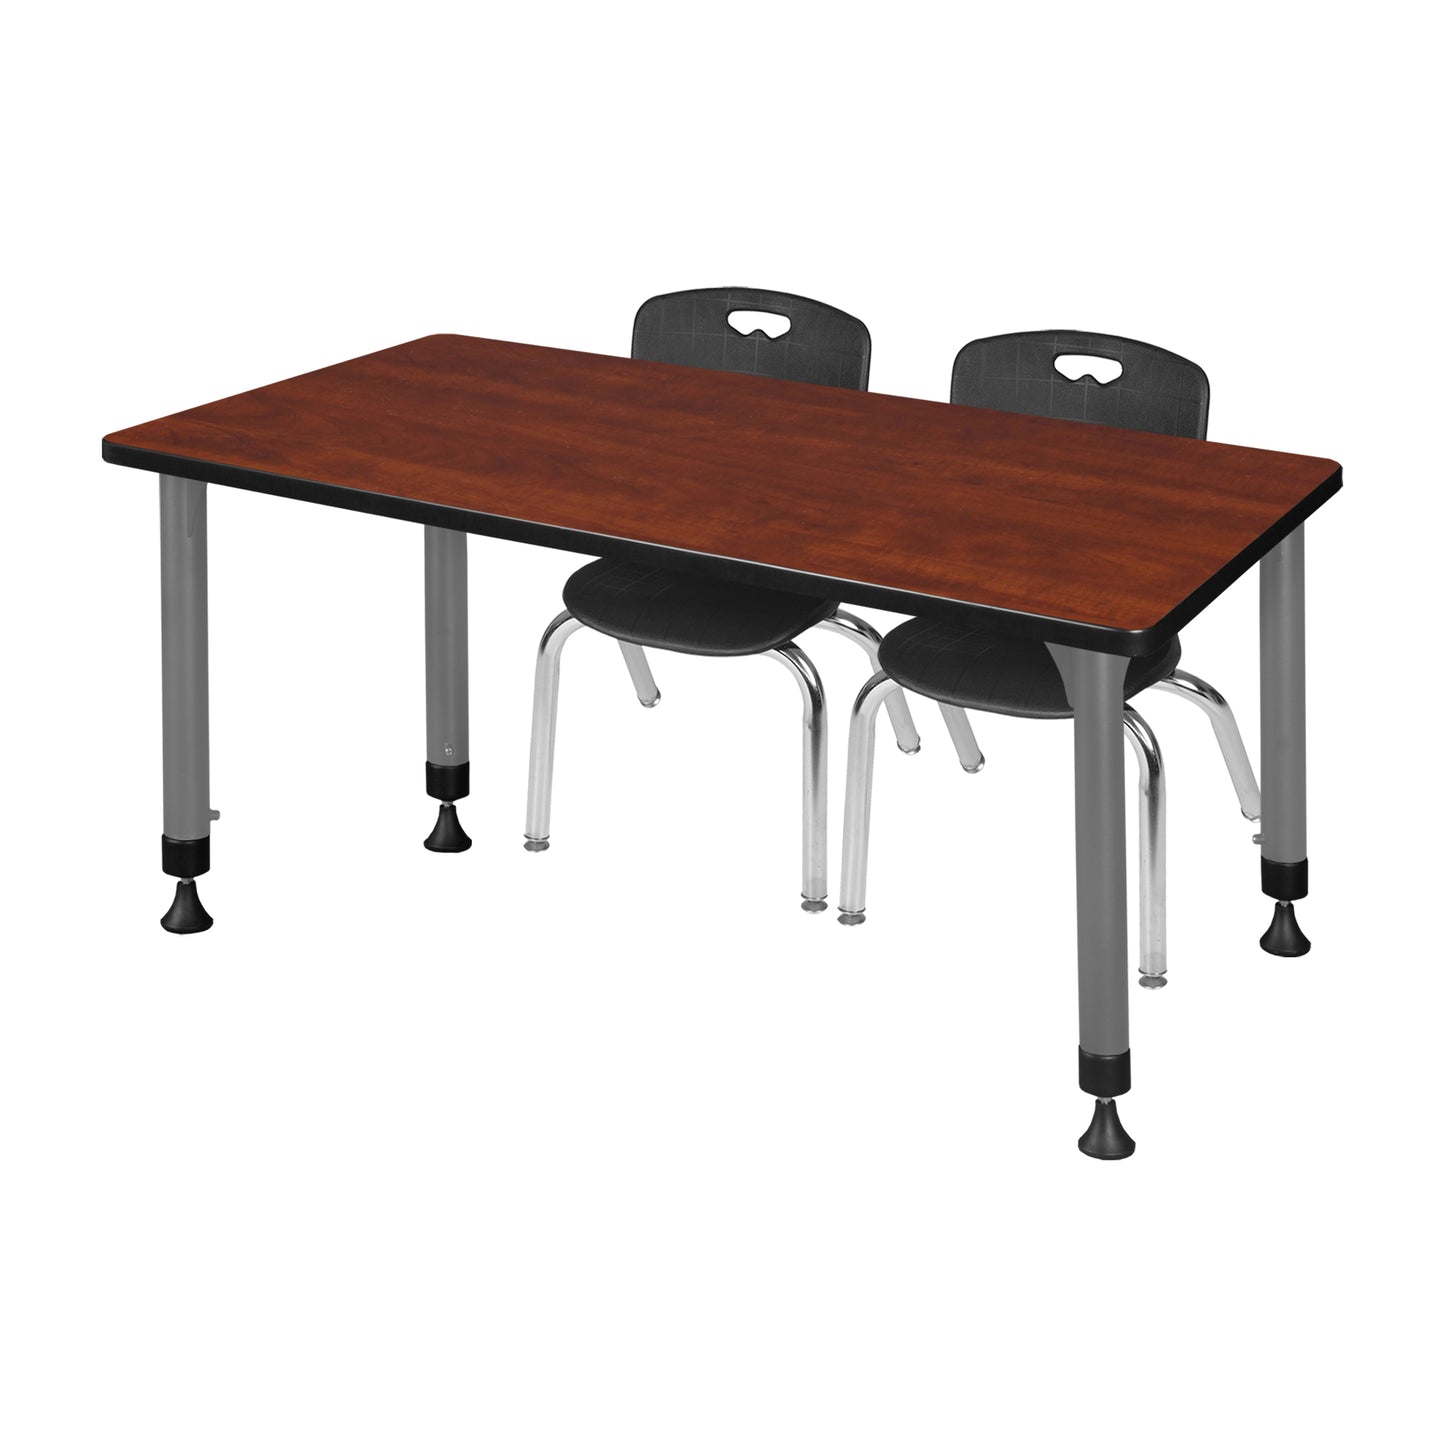 Regency Kee 66 x 30 in. Adjustable Classroom Table & 2 Andy 12 in. Stack Chairs